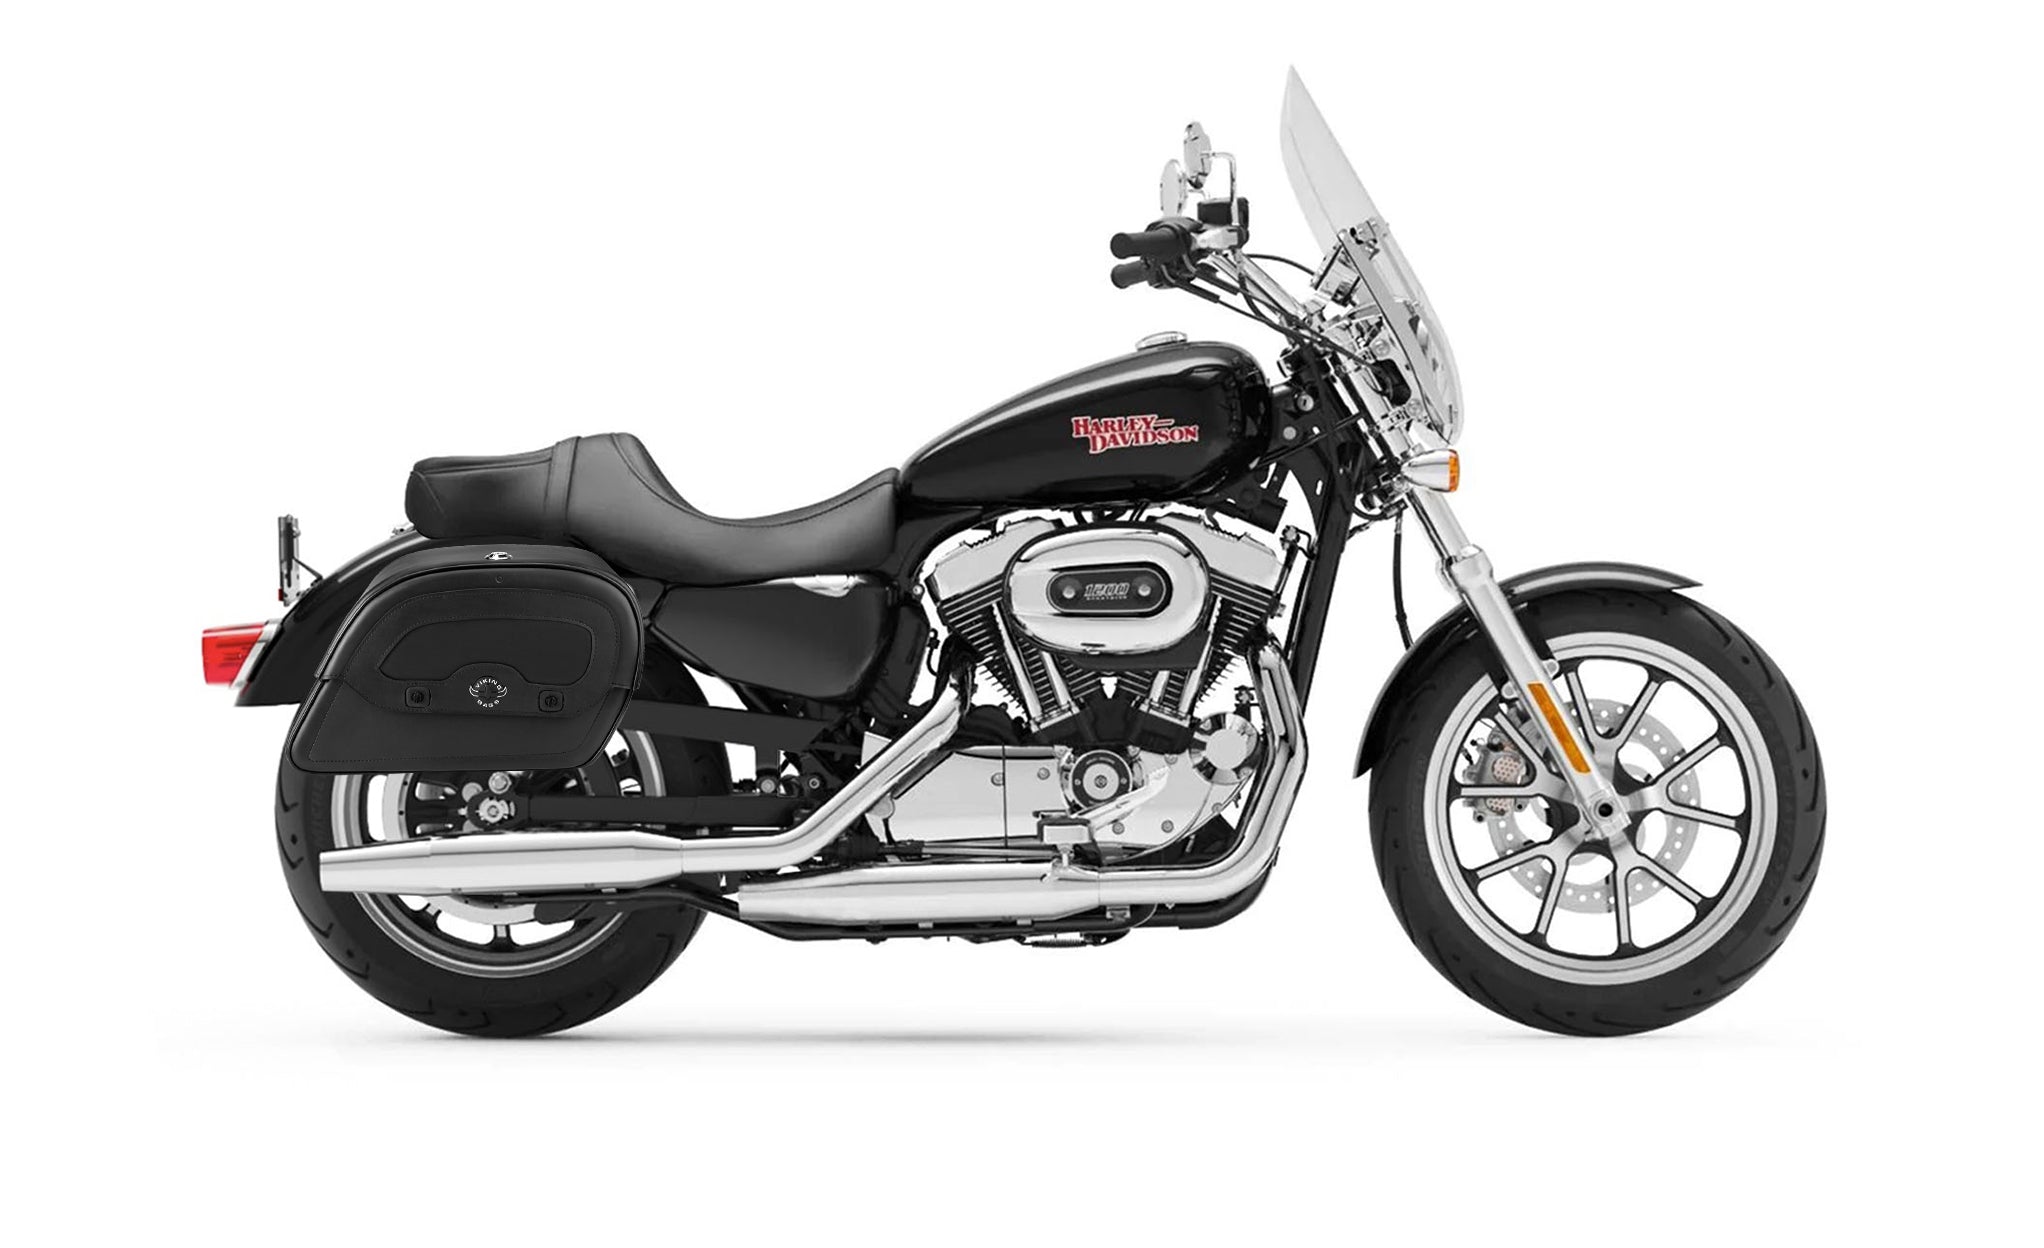 28L - Warrior Medium Quick-Mount Motorcycle Saddlebags For Harley Sportster Super Low 1200T @expand